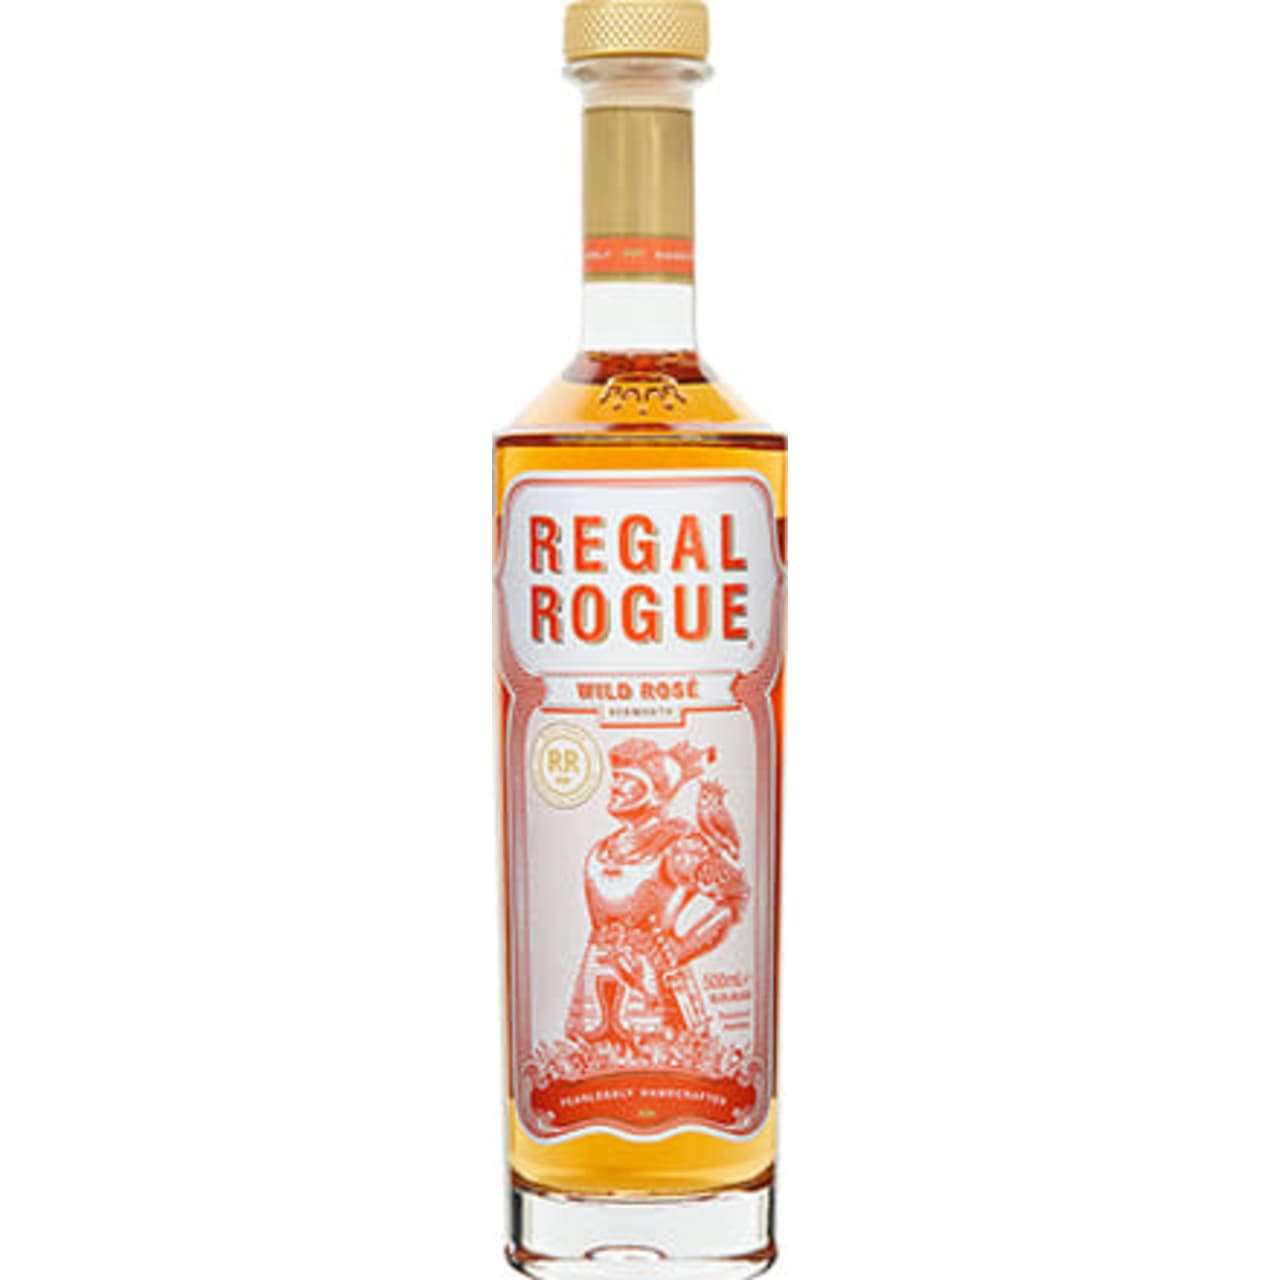 Regal Rogue Wild Rosé is led by tropical fruit and fruit spice notes, marrying a pale and dry Barossa Shiraz Rosé from the Adelaide Hills with native illawara plums, rosella and strawberry gum, and rhubarb and kina.